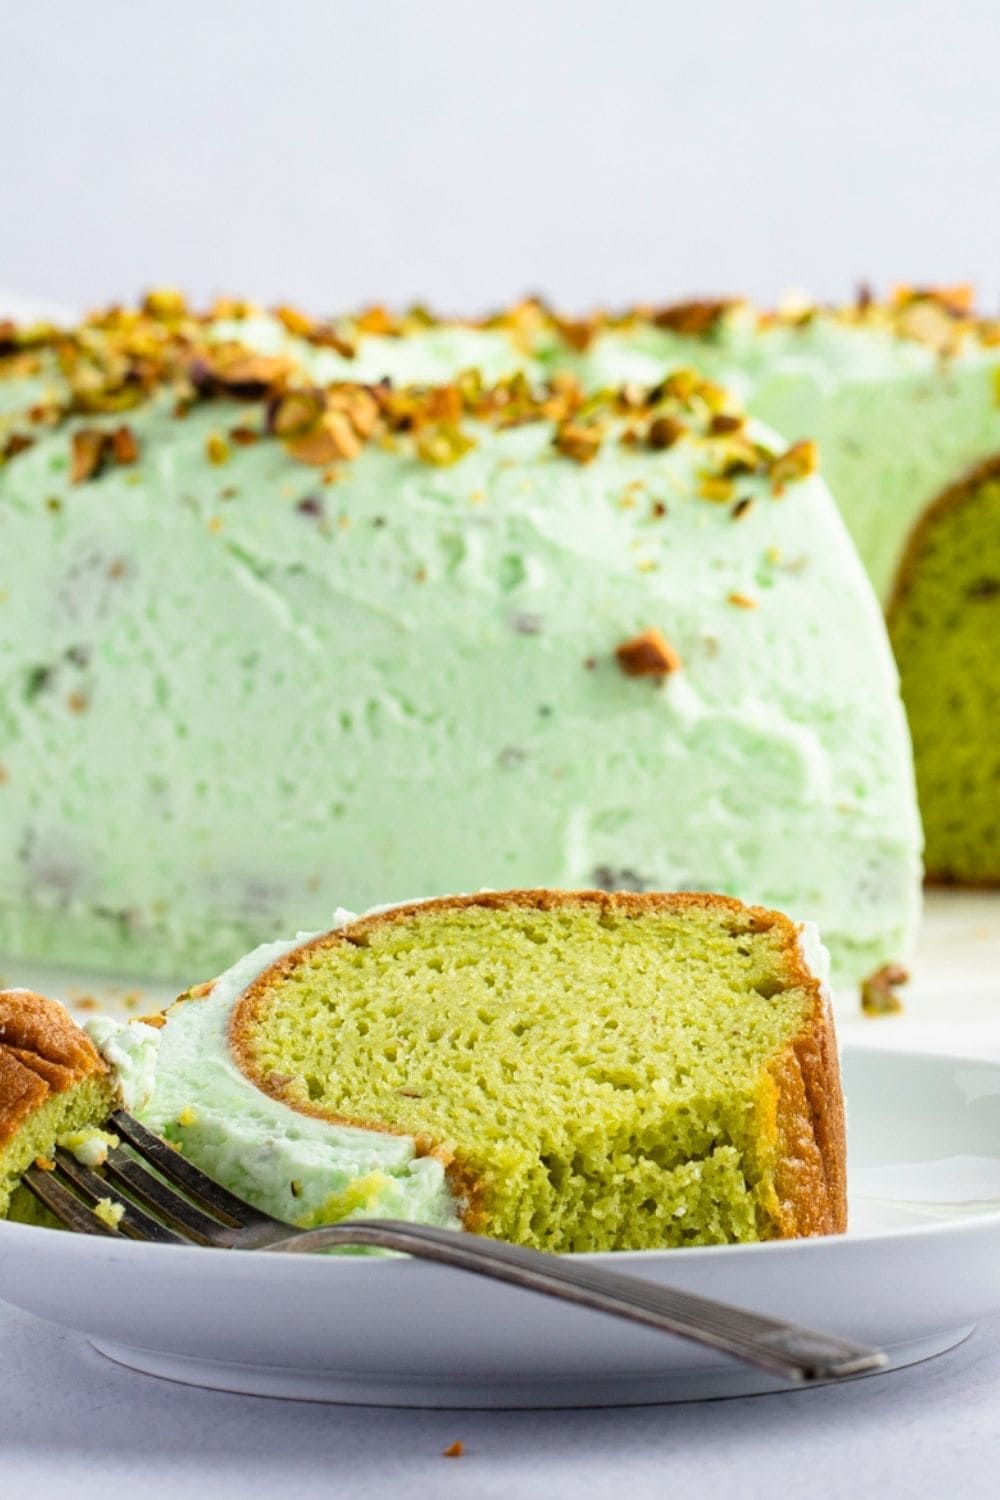 A Slice of Pistachio Cake Served on a Plate With Fork